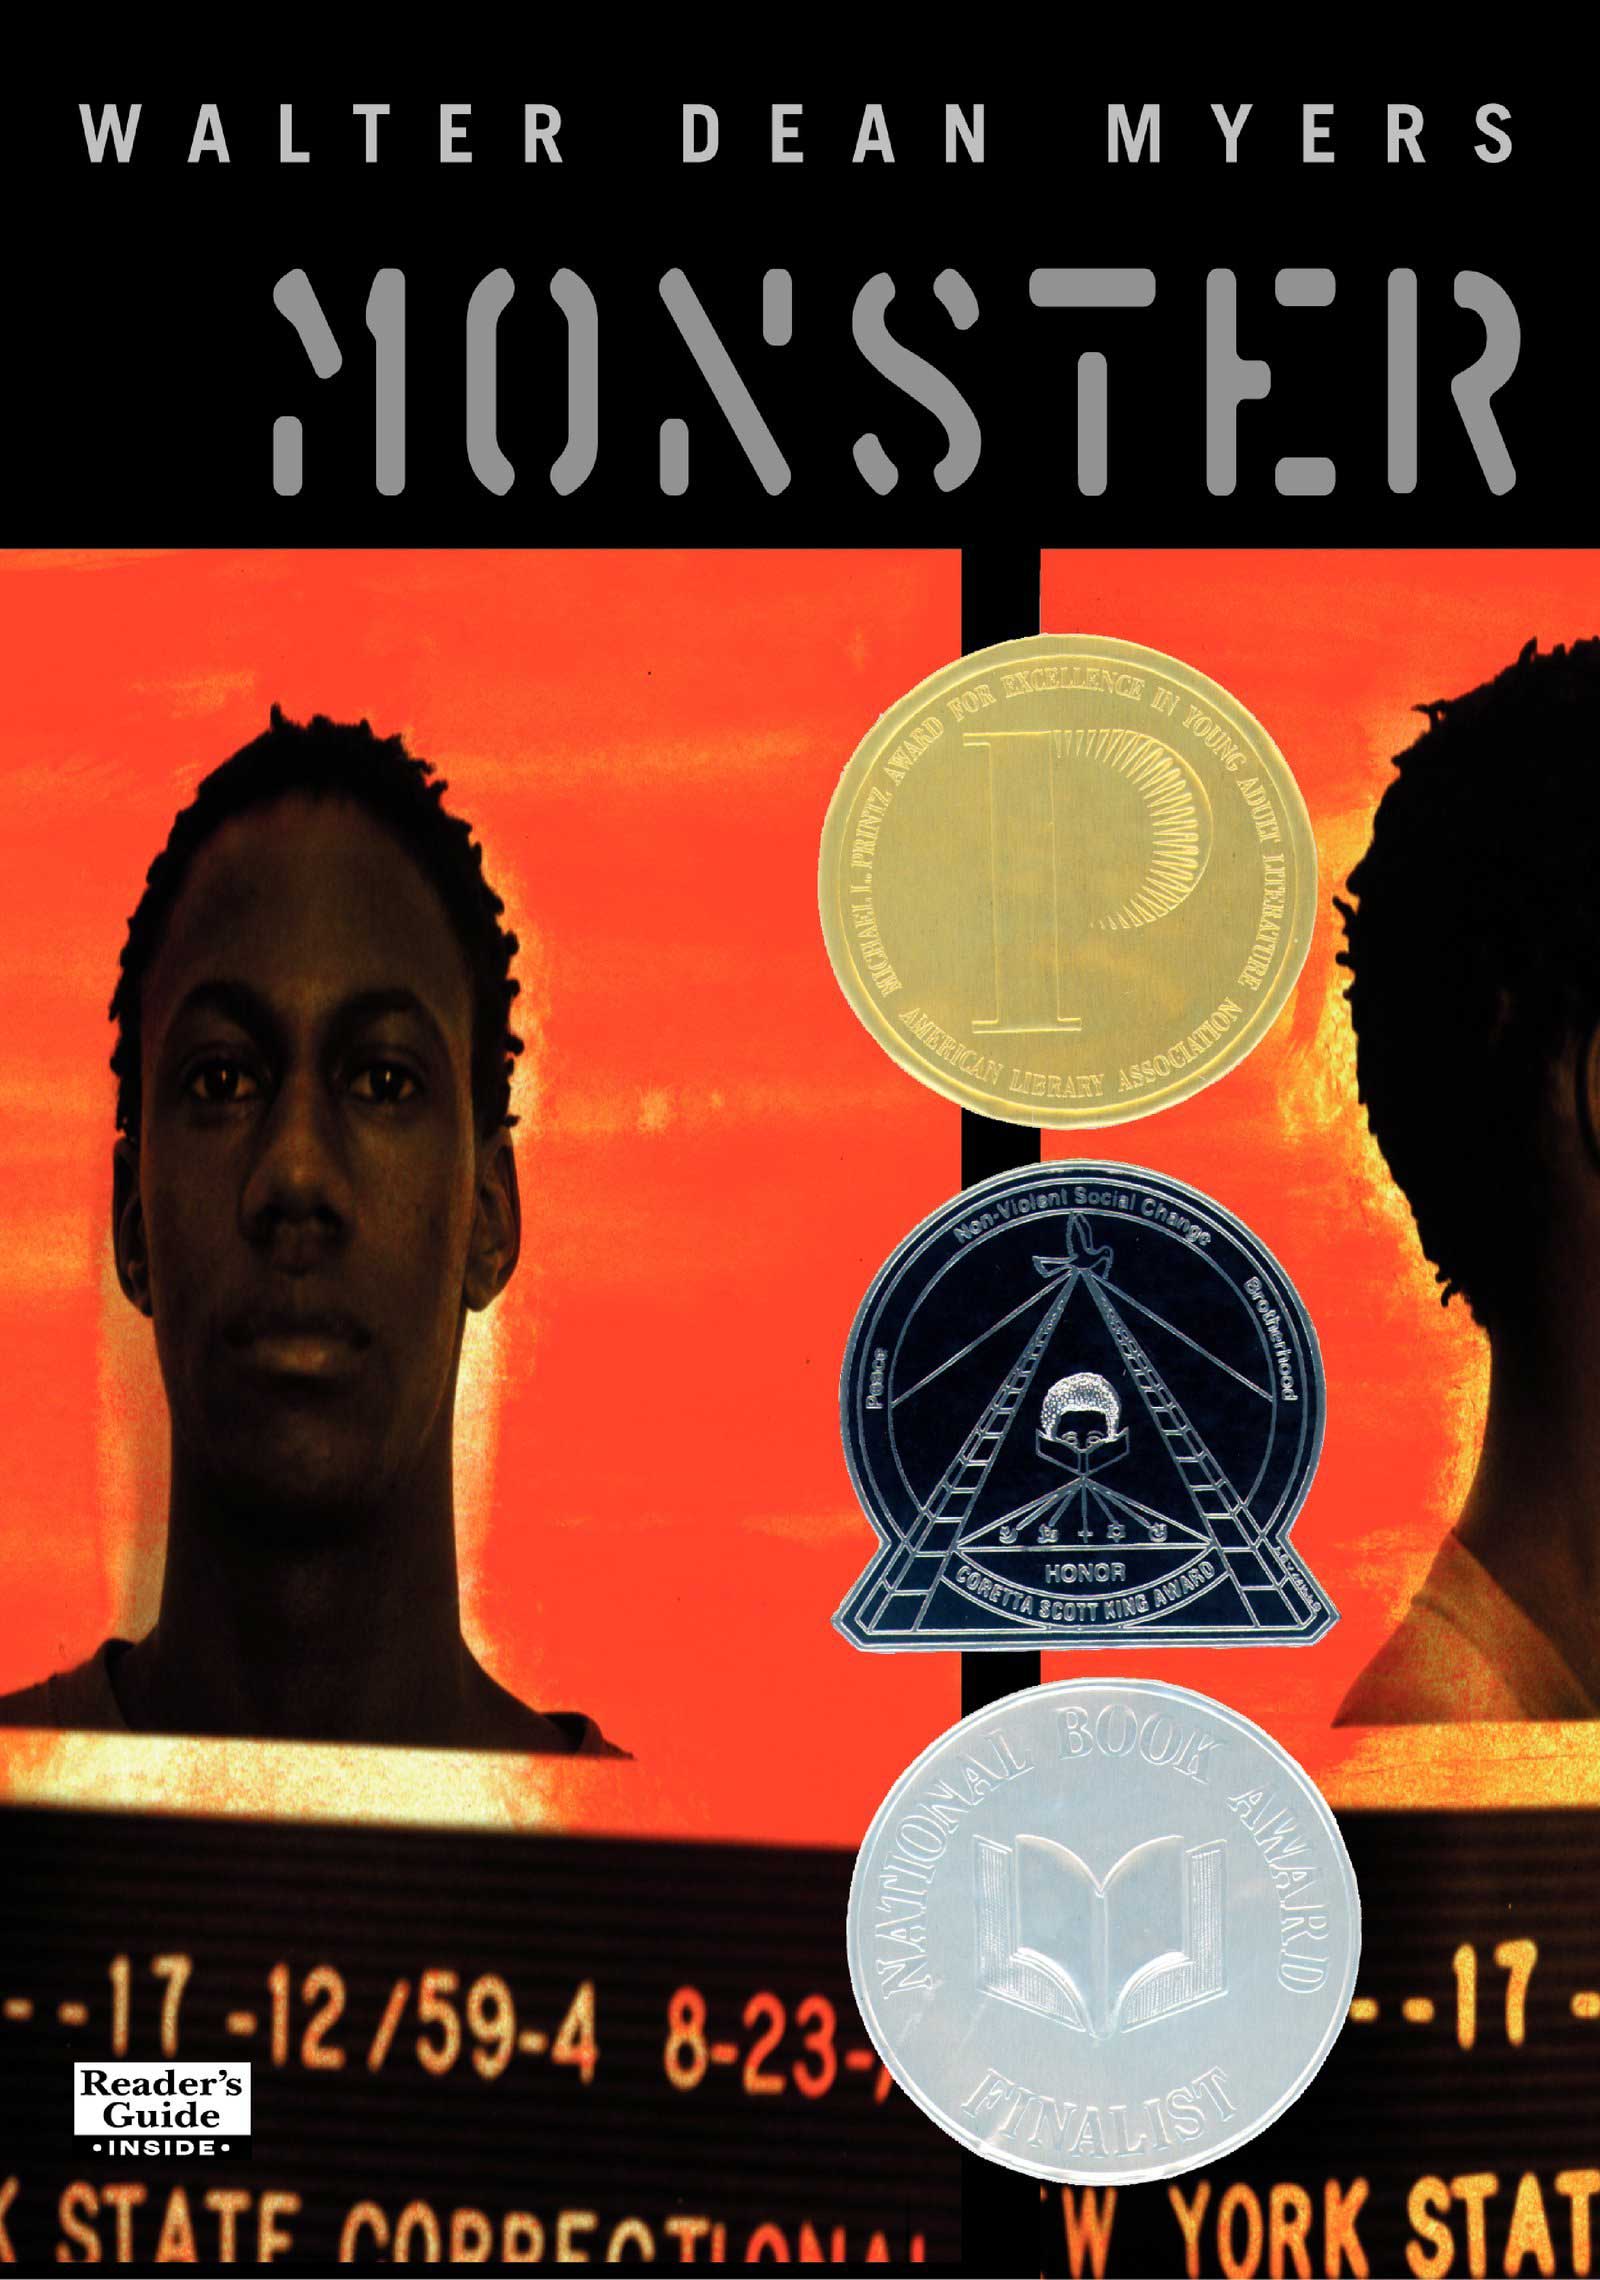 Monster, by Walter Dean Myers. 
                              
                              
                              
                              A fictional account of an African American teenager on trial for felony murder in New York, written in a mix of first-person journal entries and a third-person screenplay.
                              
                              
                              
                              Buy now: Monster